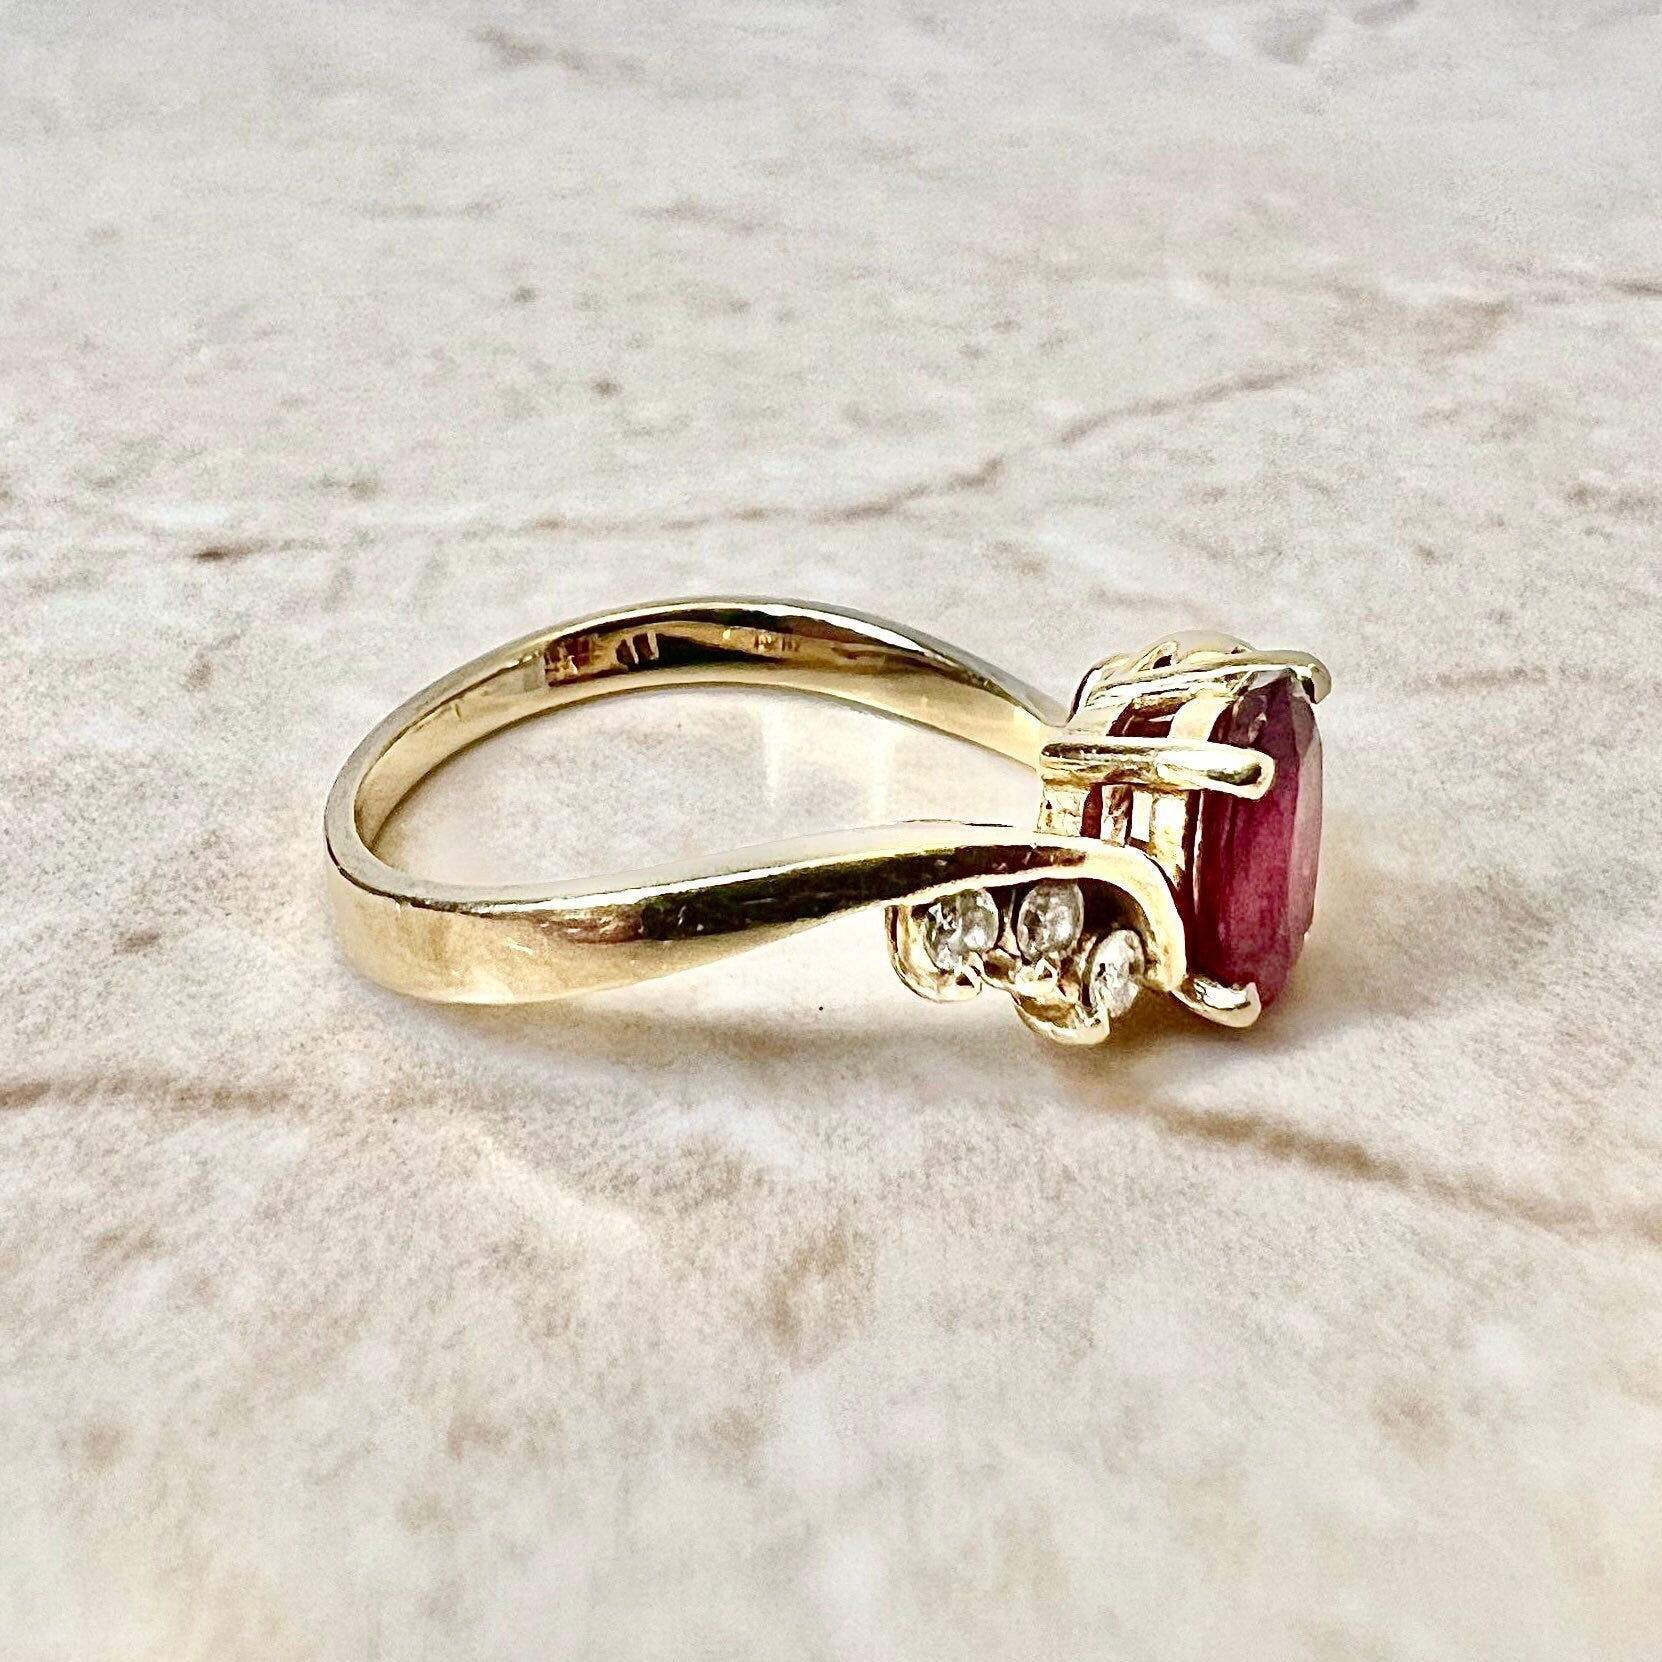 14K Natural Ruby & Diamond Ring - Yellow Gold Oval Ruby Cocktail Ring - Promise Ring - July Birthstone - Birthday Gift - Best Gift For Her